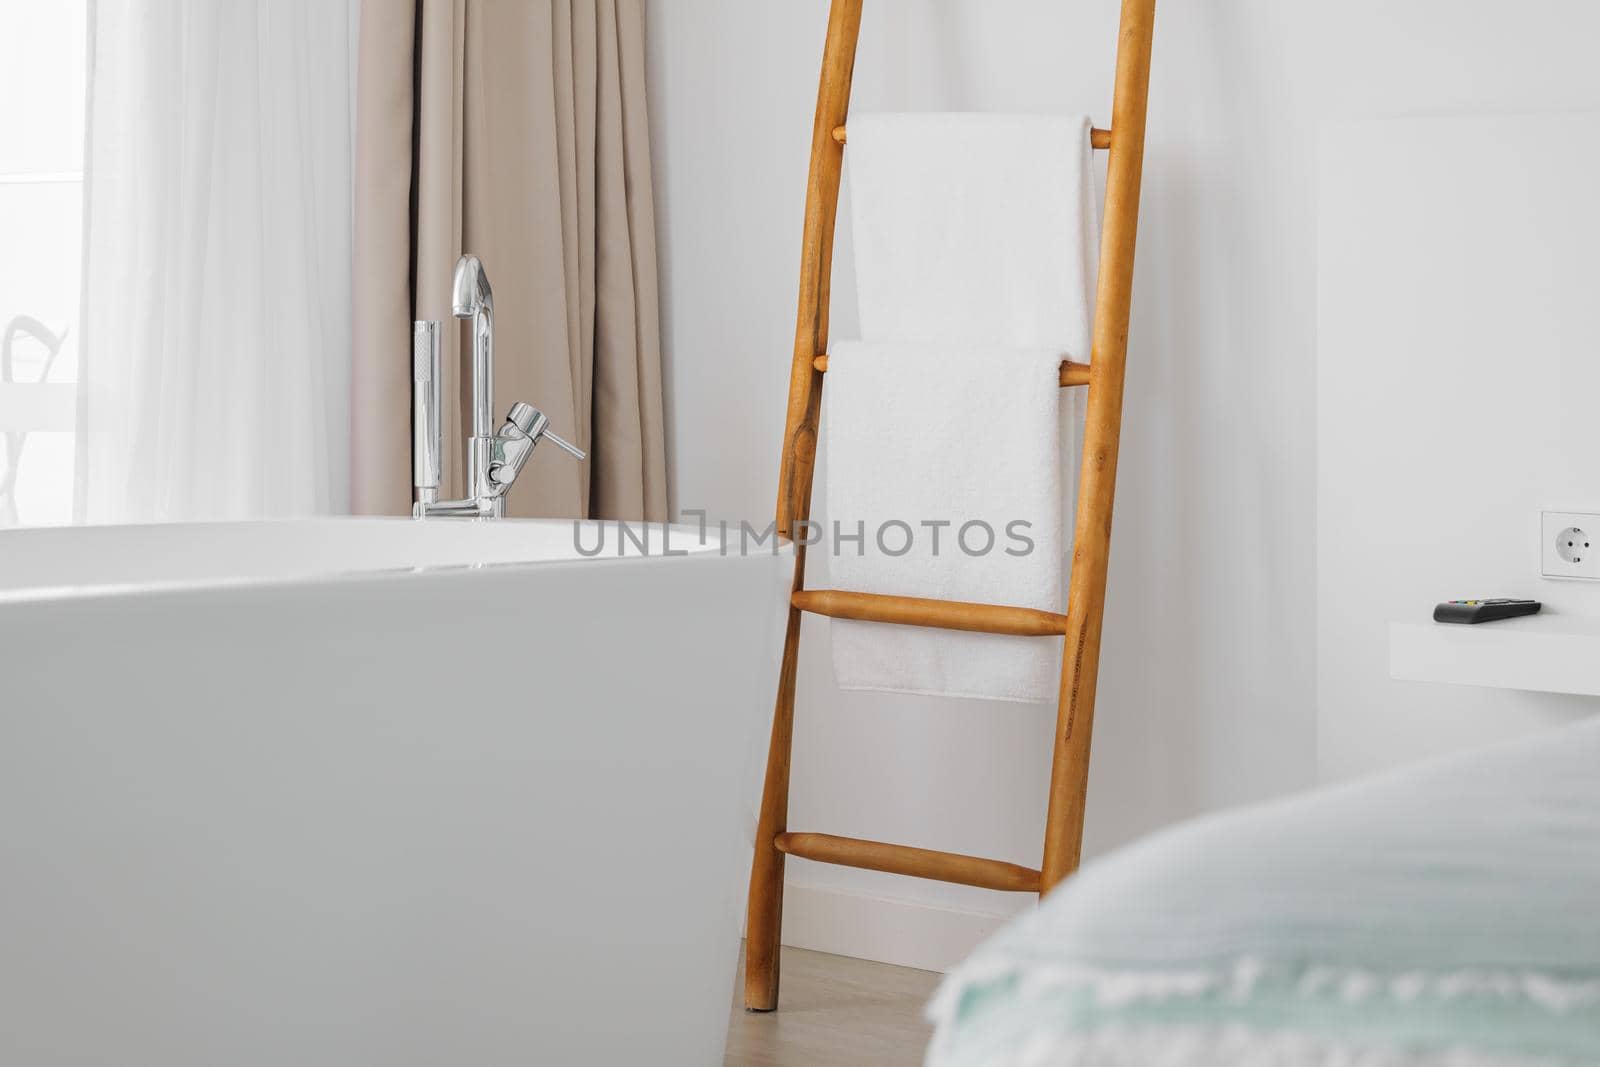 Modern hotel bedroom interior with bathroom, metal faucet and white towels on a decorative wooden staircase